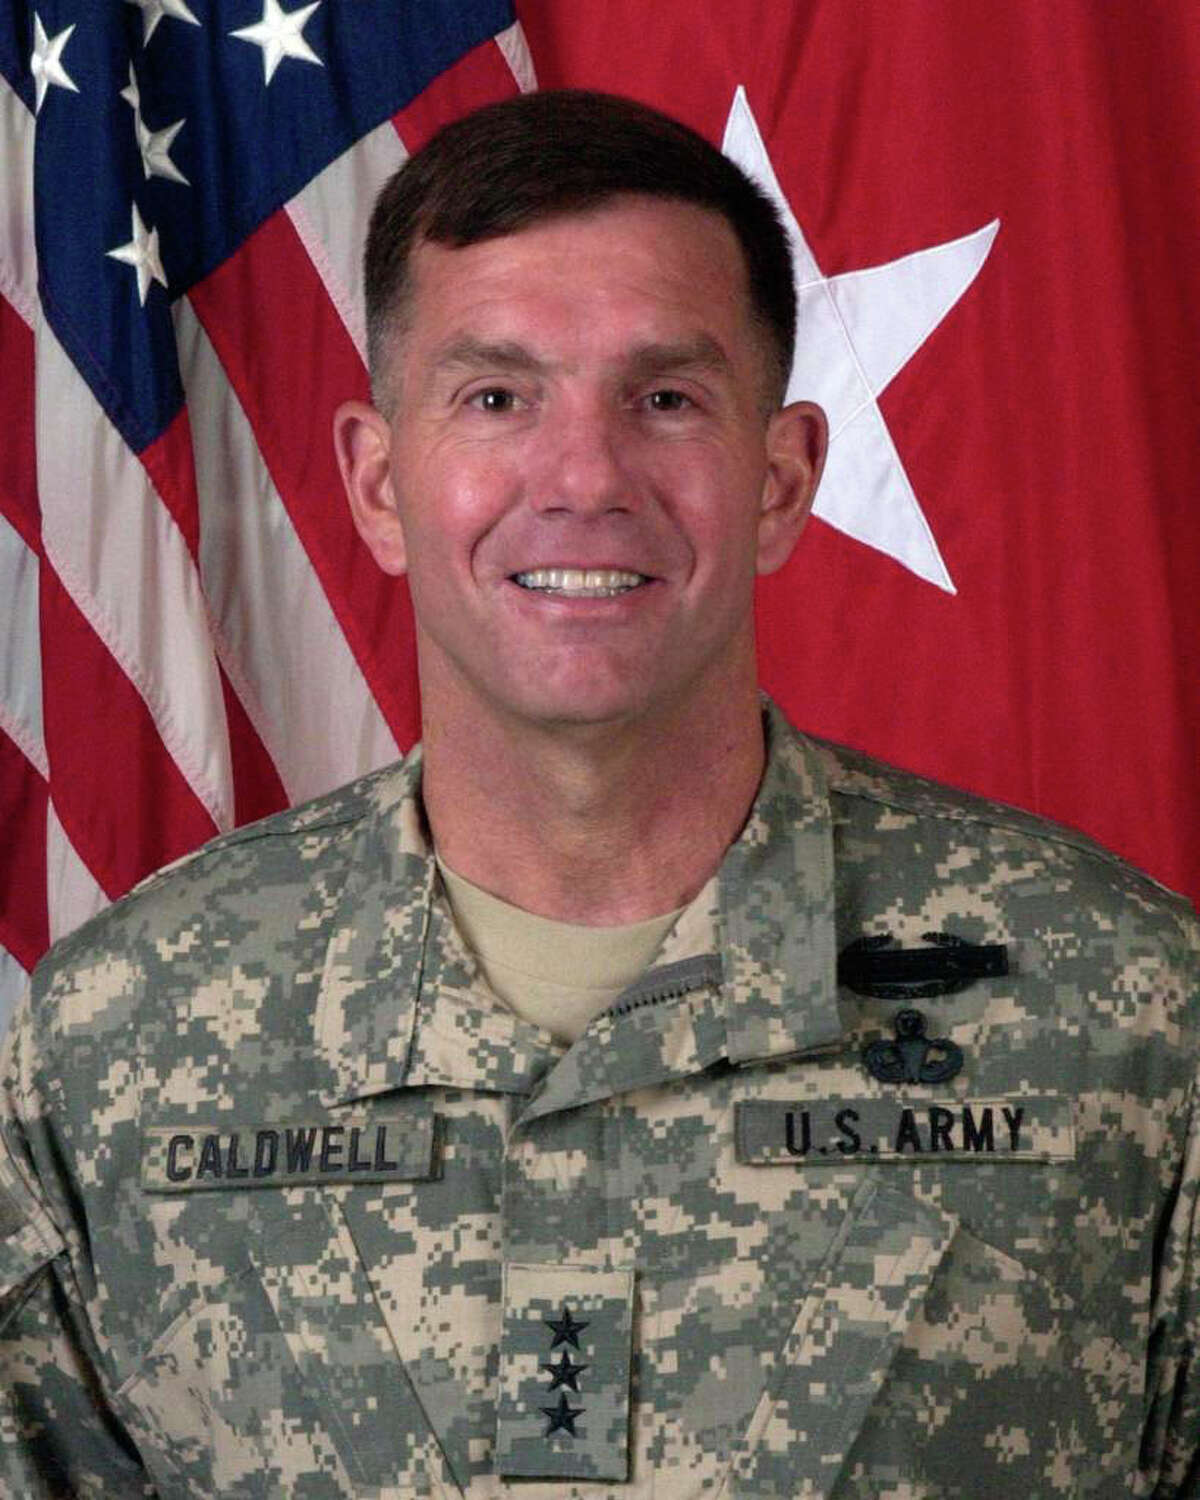 Lt. Gen. William Caldwell IV is the former commanding general of U.S. Army North (5th Army) and senior commander of Fort Sam Houston.